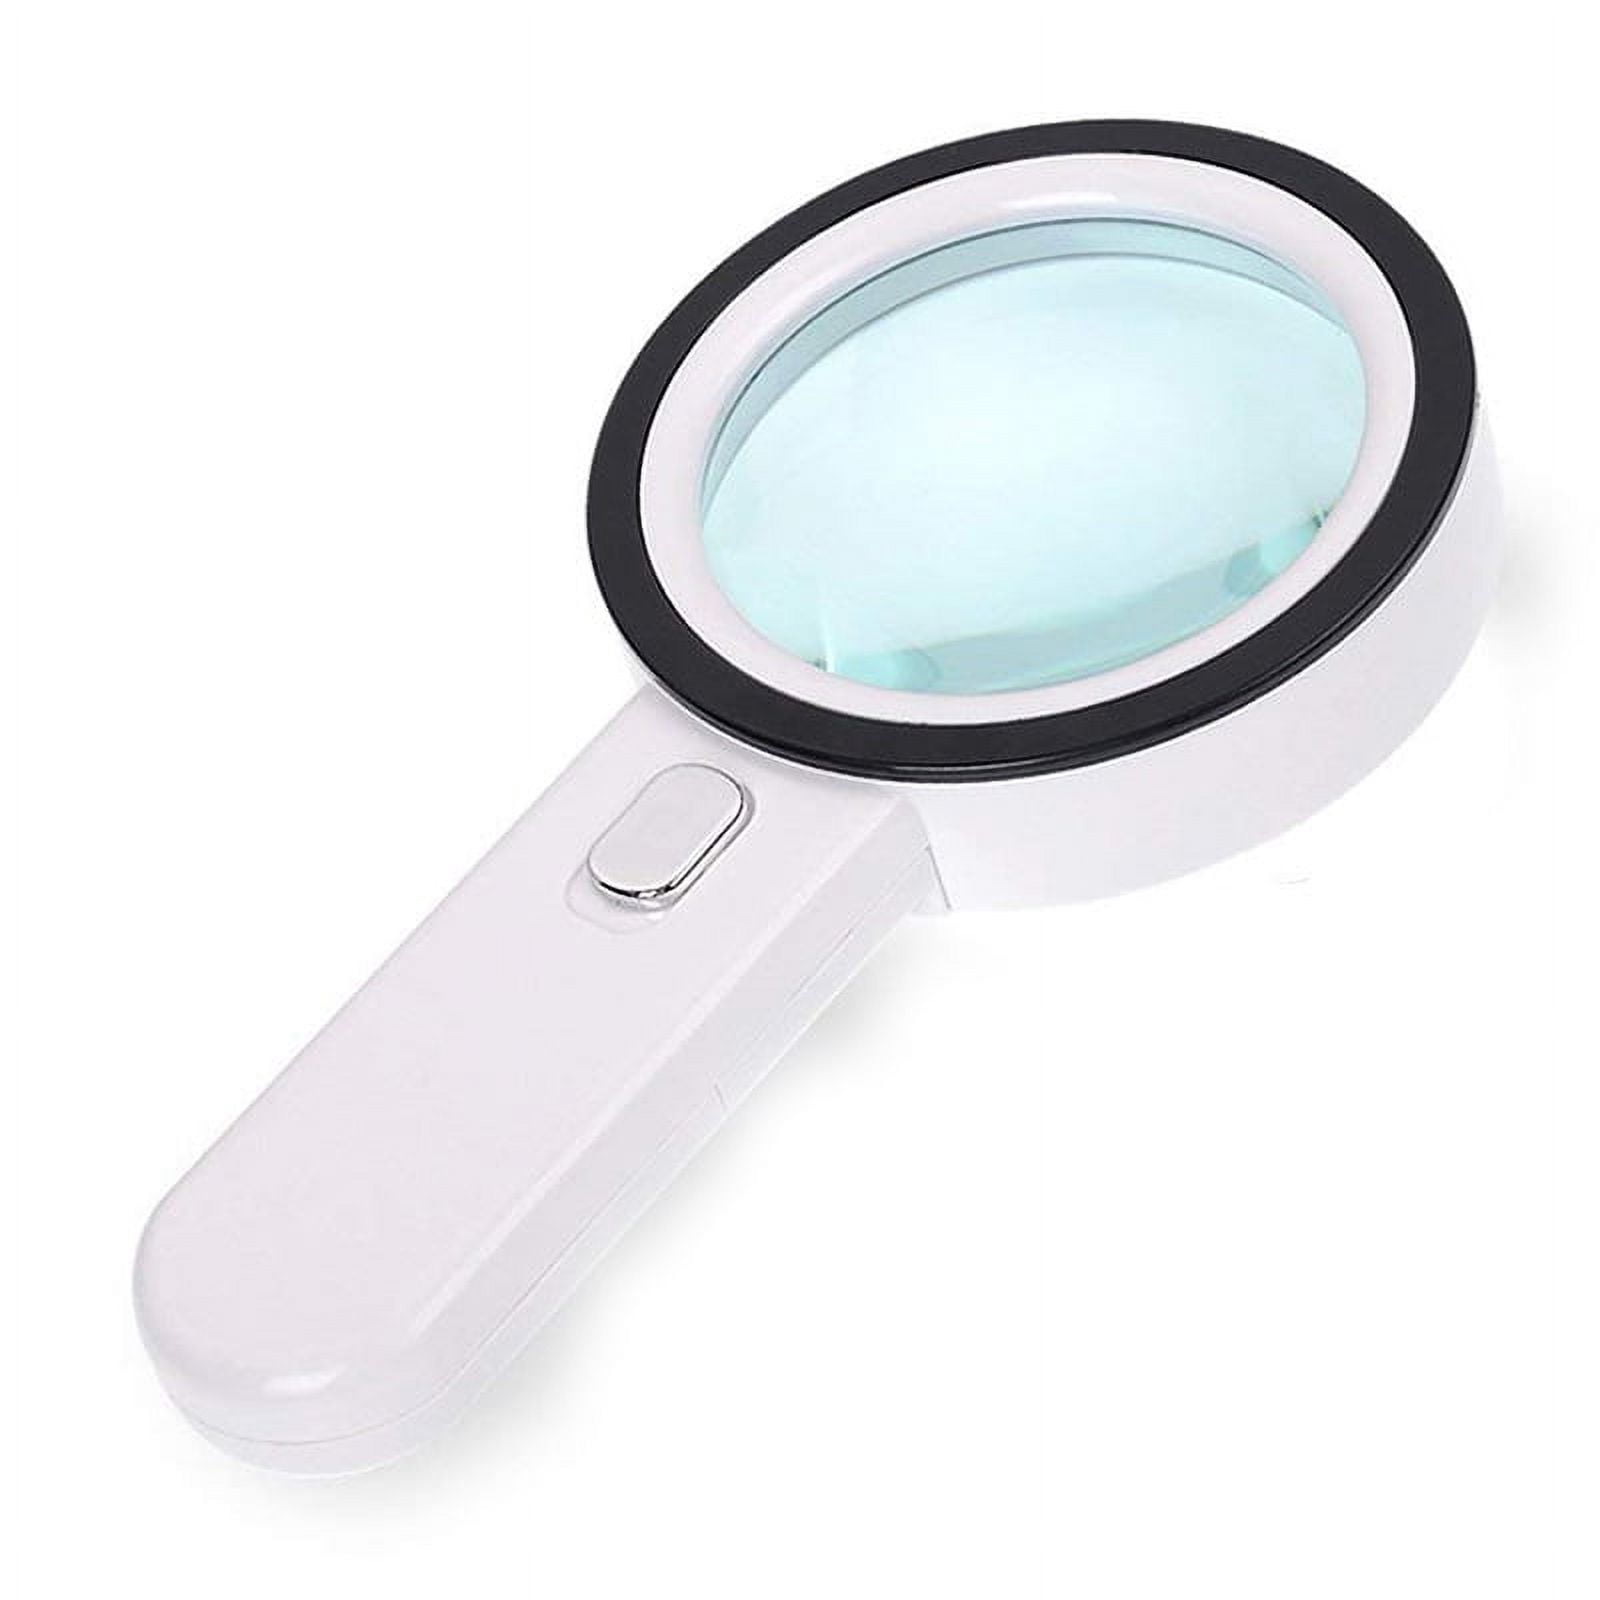 Magnifying Glass 20X, Magnifier with Light, LED Illuminated